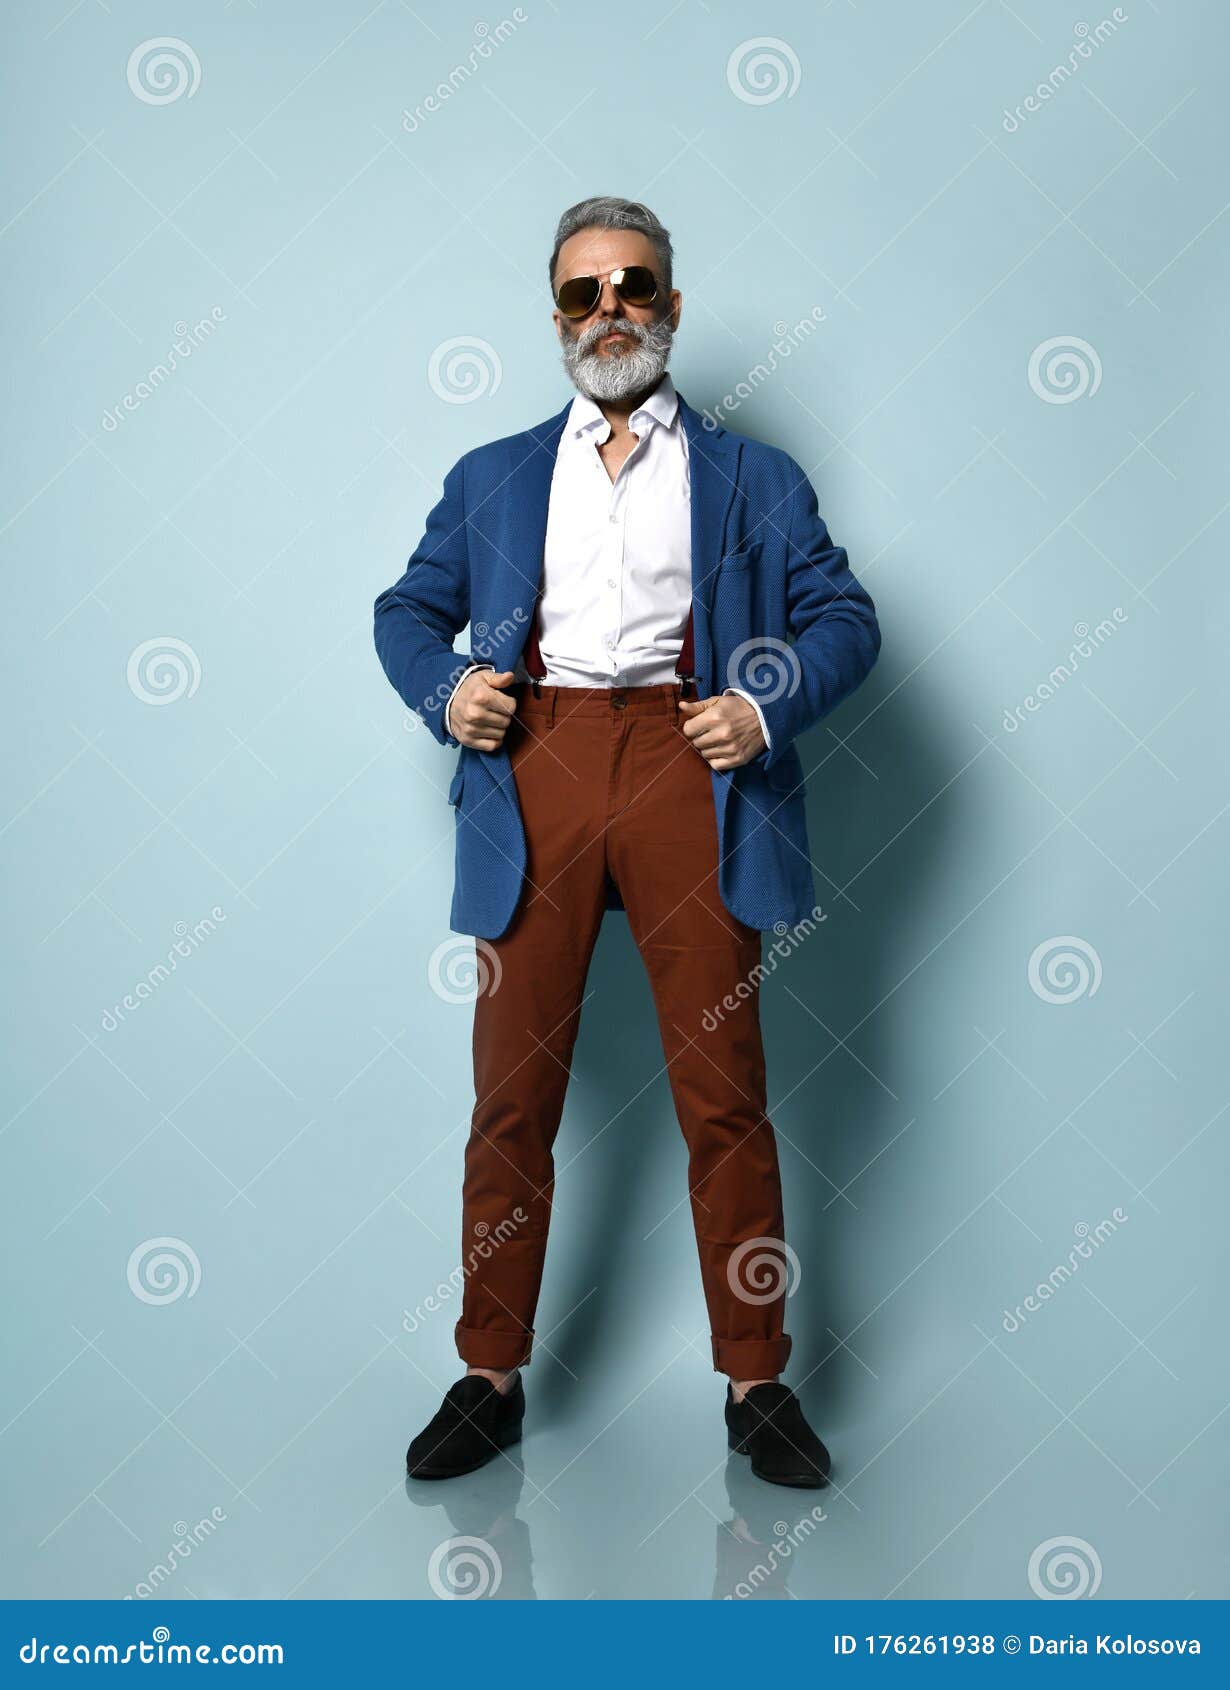 Wedding Groom Suit White Shirt Brown Pants Stock Photo Picture And  Royalty Free Image Image 44531129